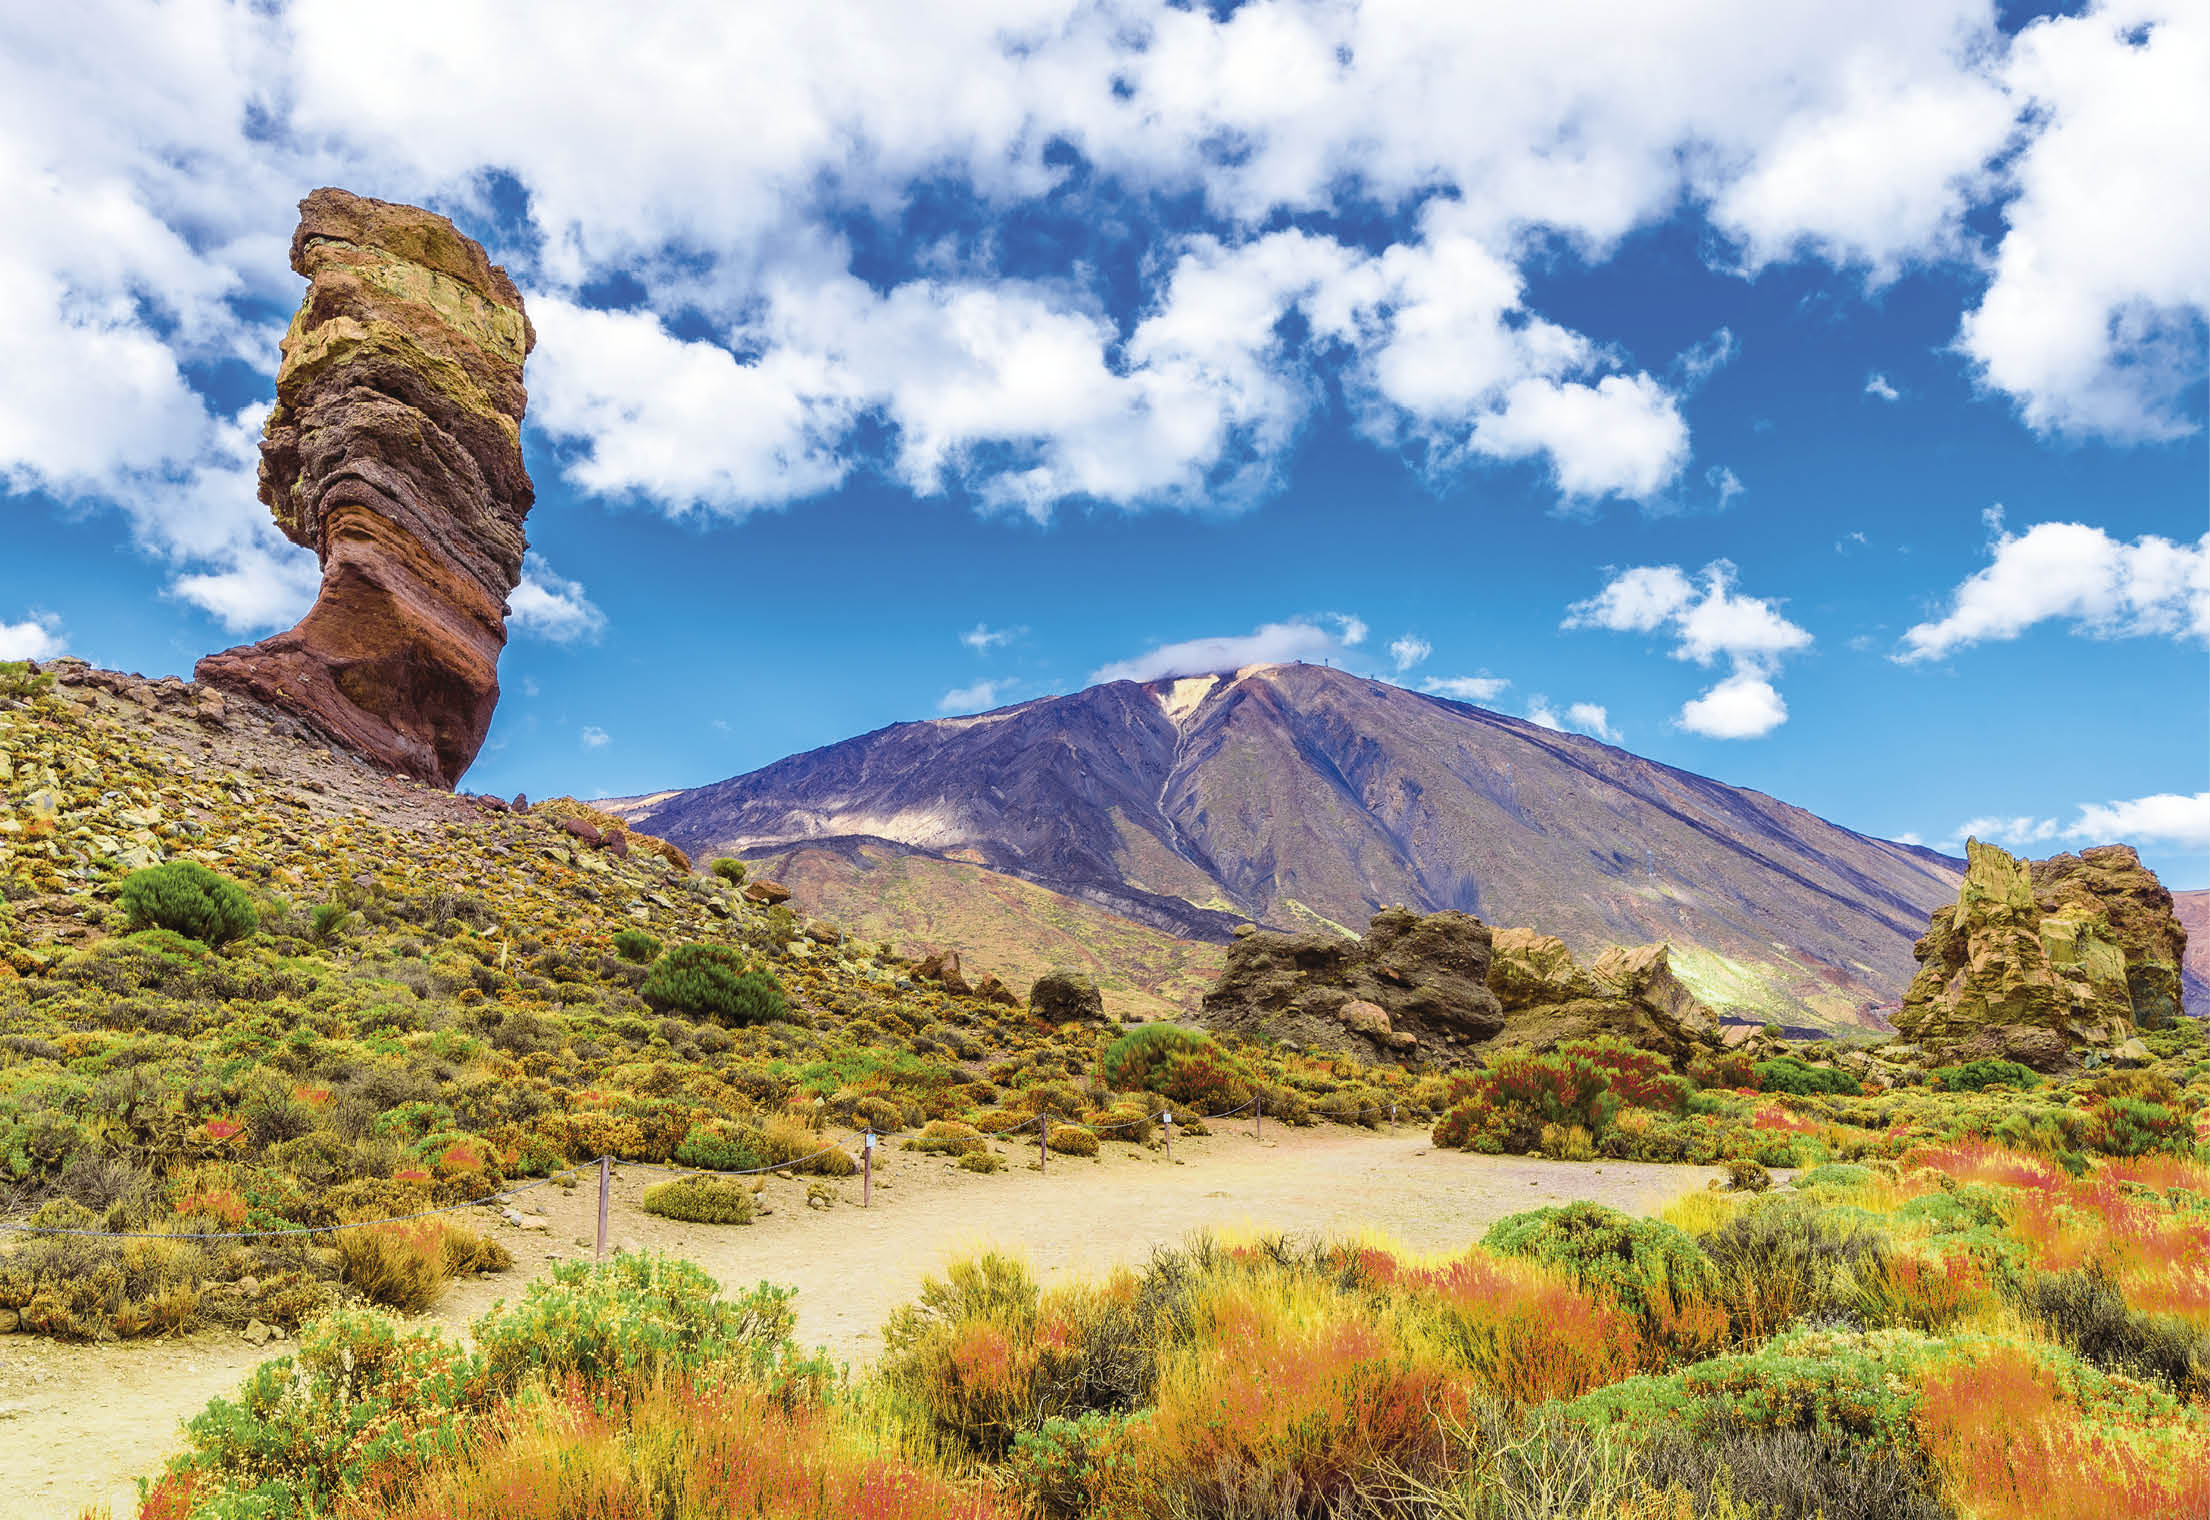 View of  Roques de Garcia formation and Teide mountain volcano in Teide National Park, Tenerife, Canary Islands, Spain 